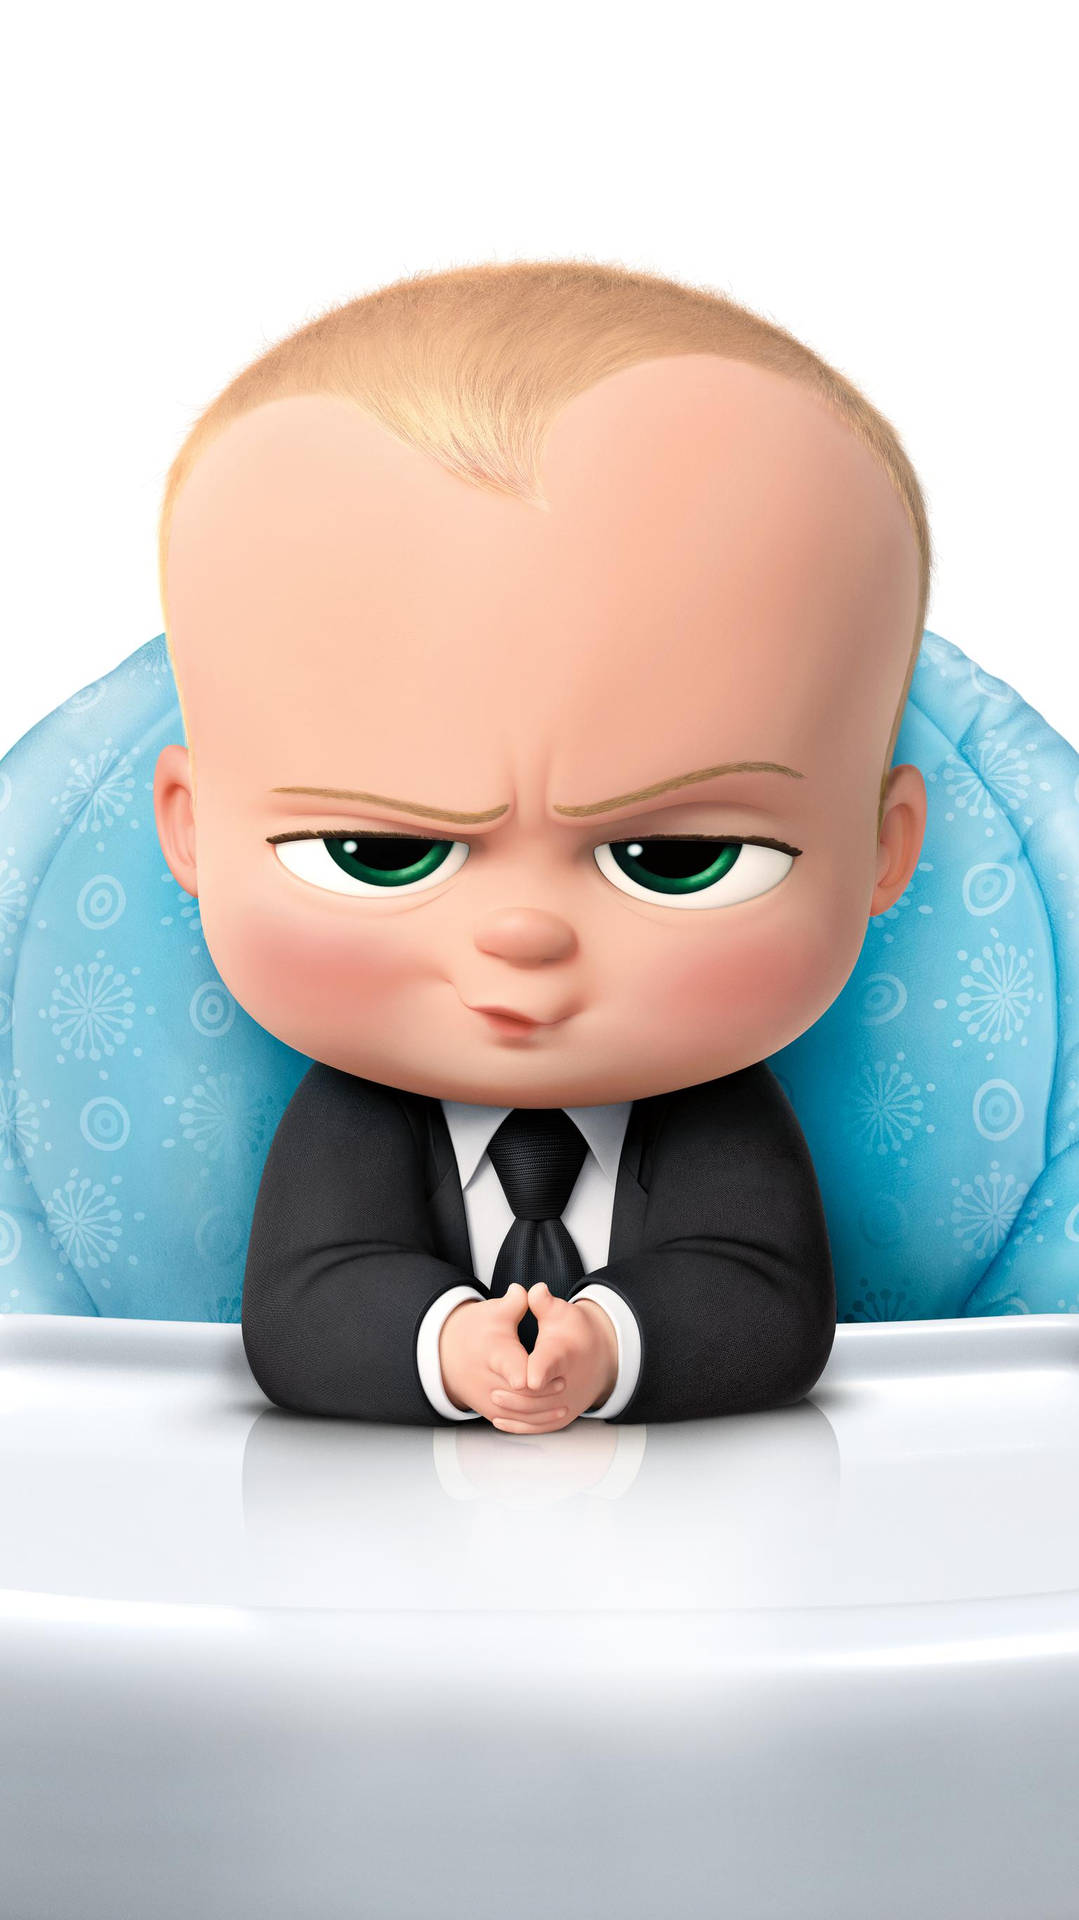 The Boss Baby In Serious Face Background